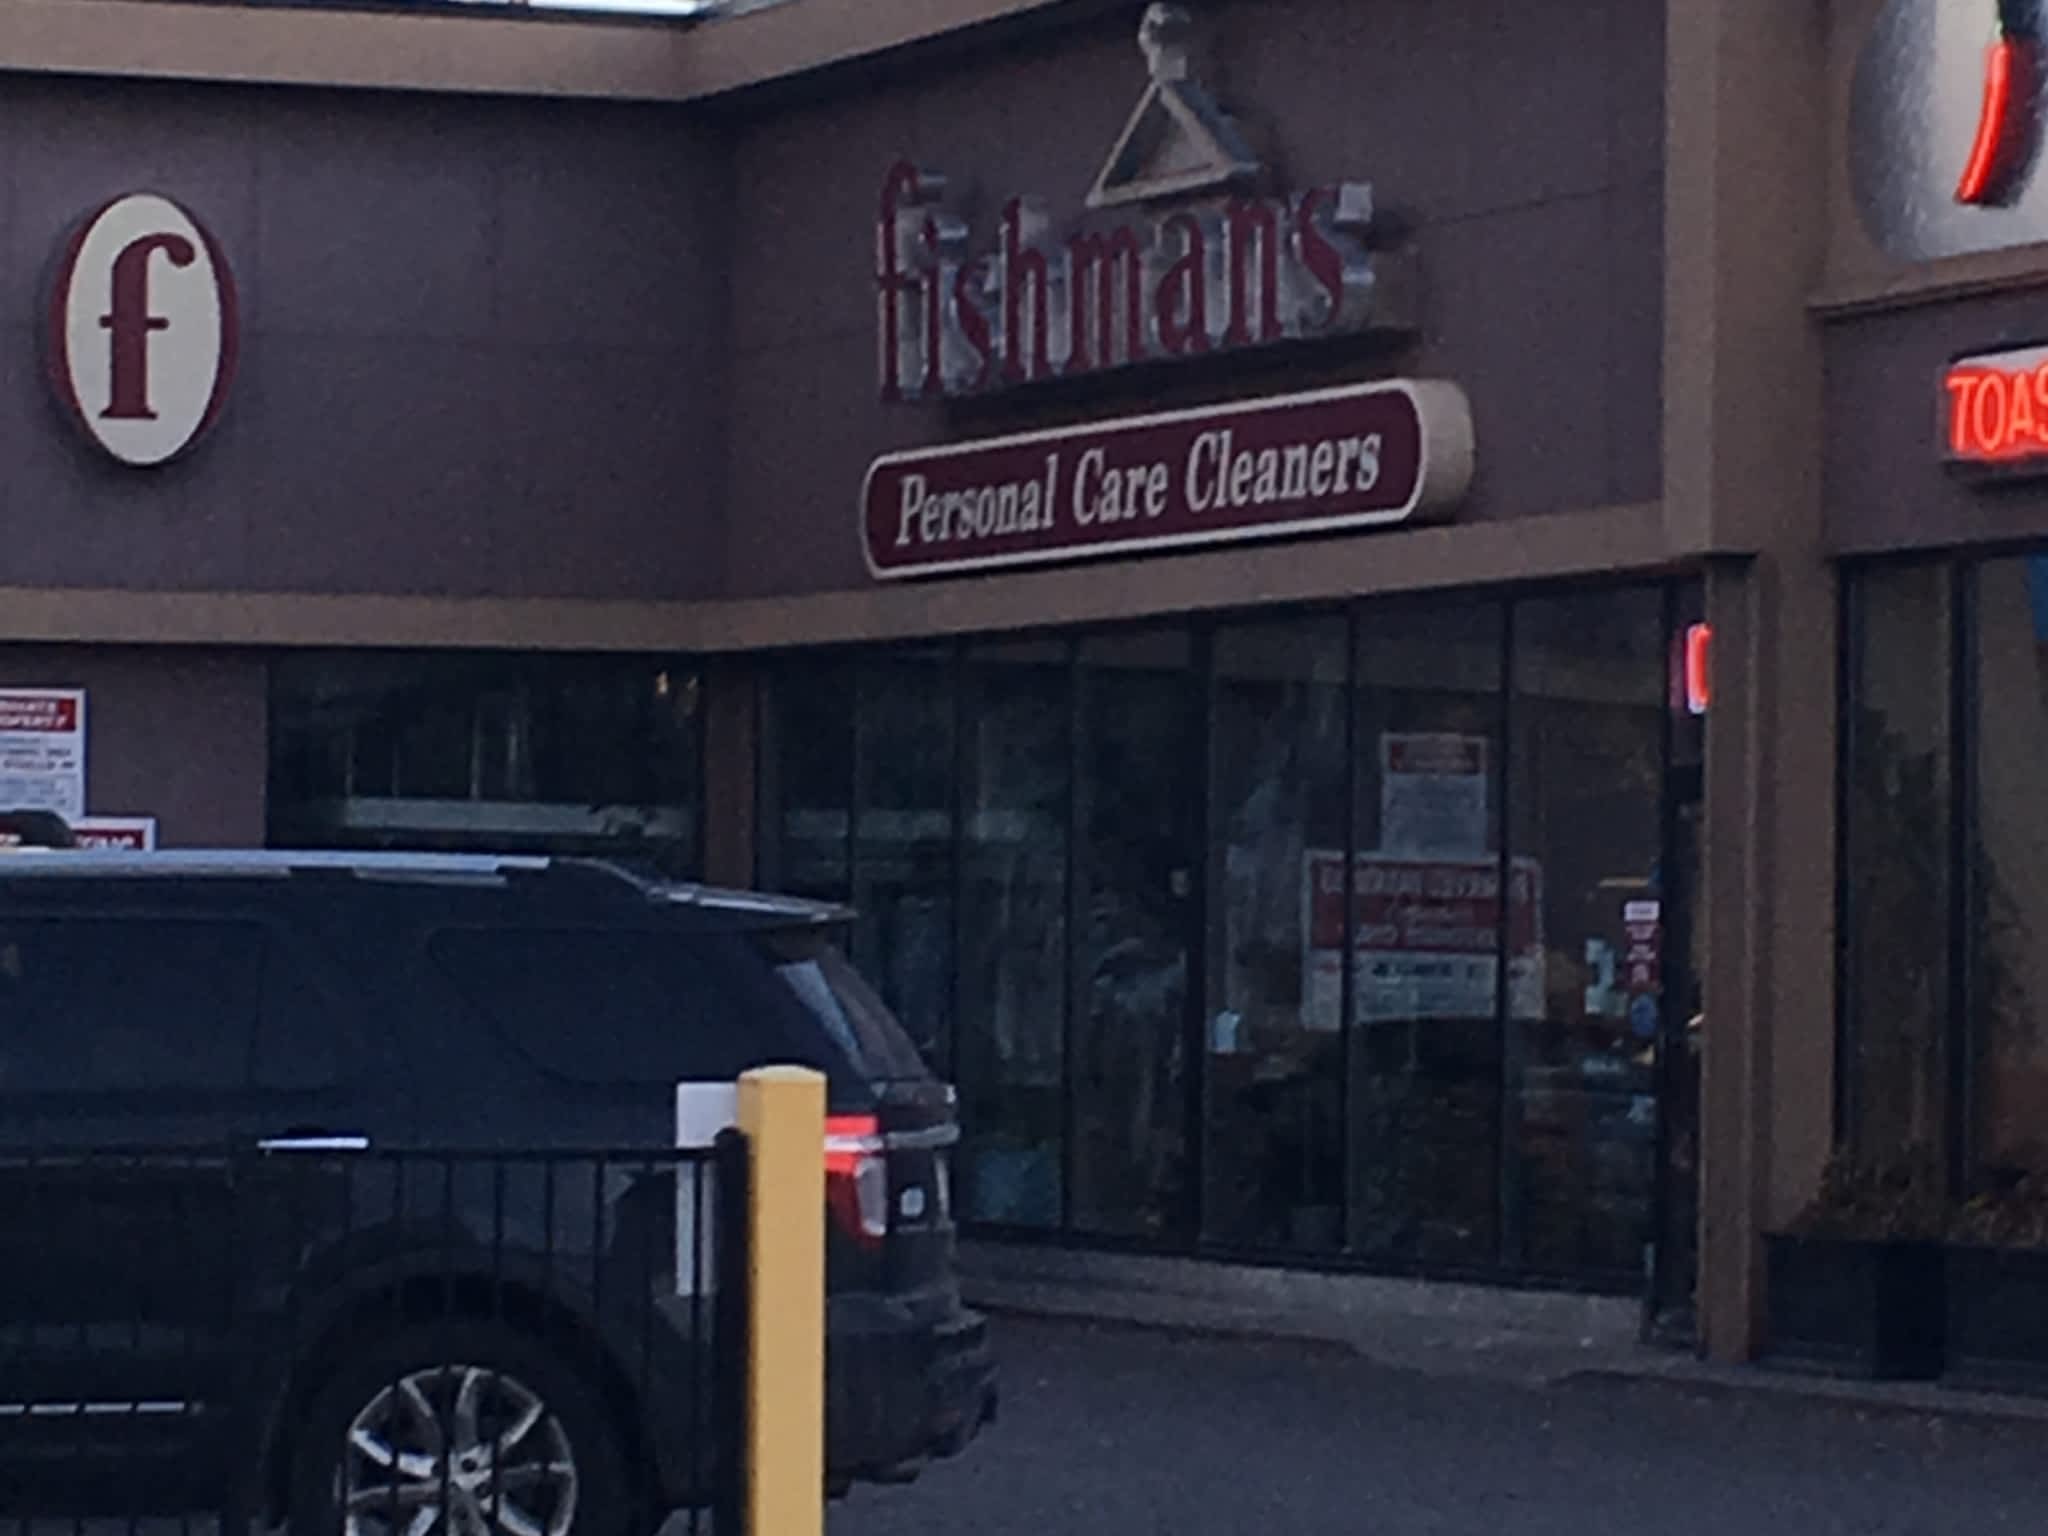 photo Fishman's Personal Care Cleaners